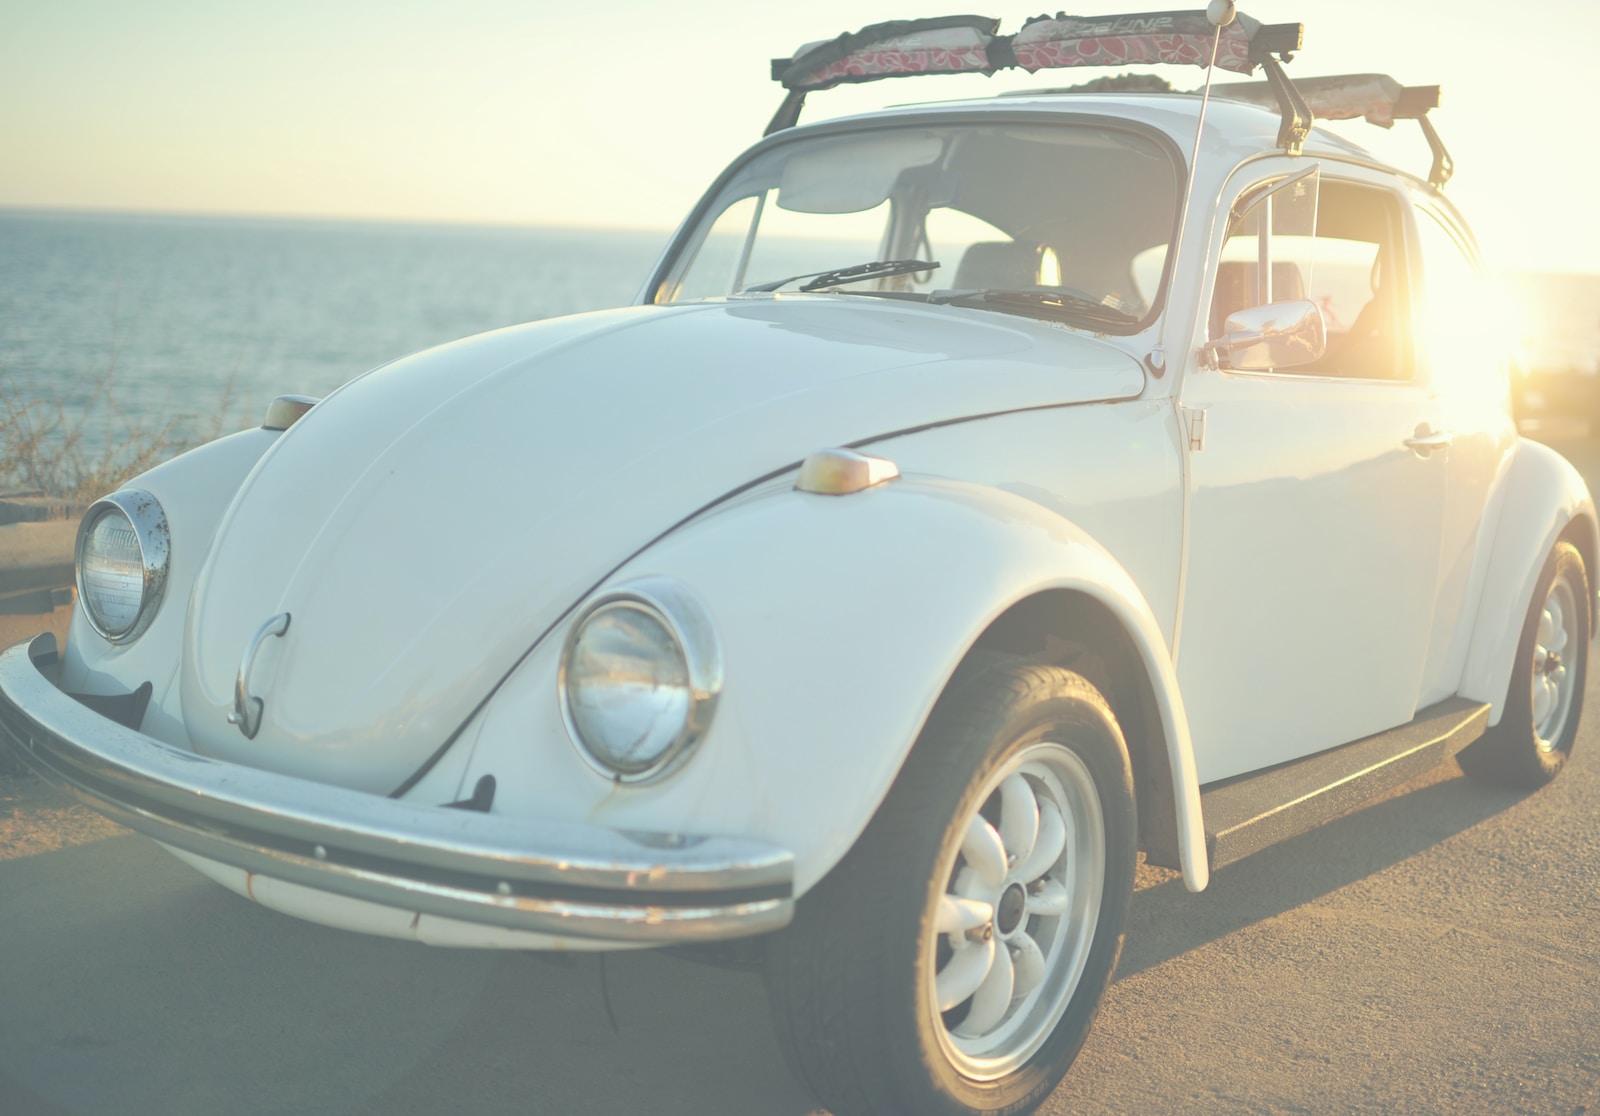 white Volkswagen Beetle on road at daytime